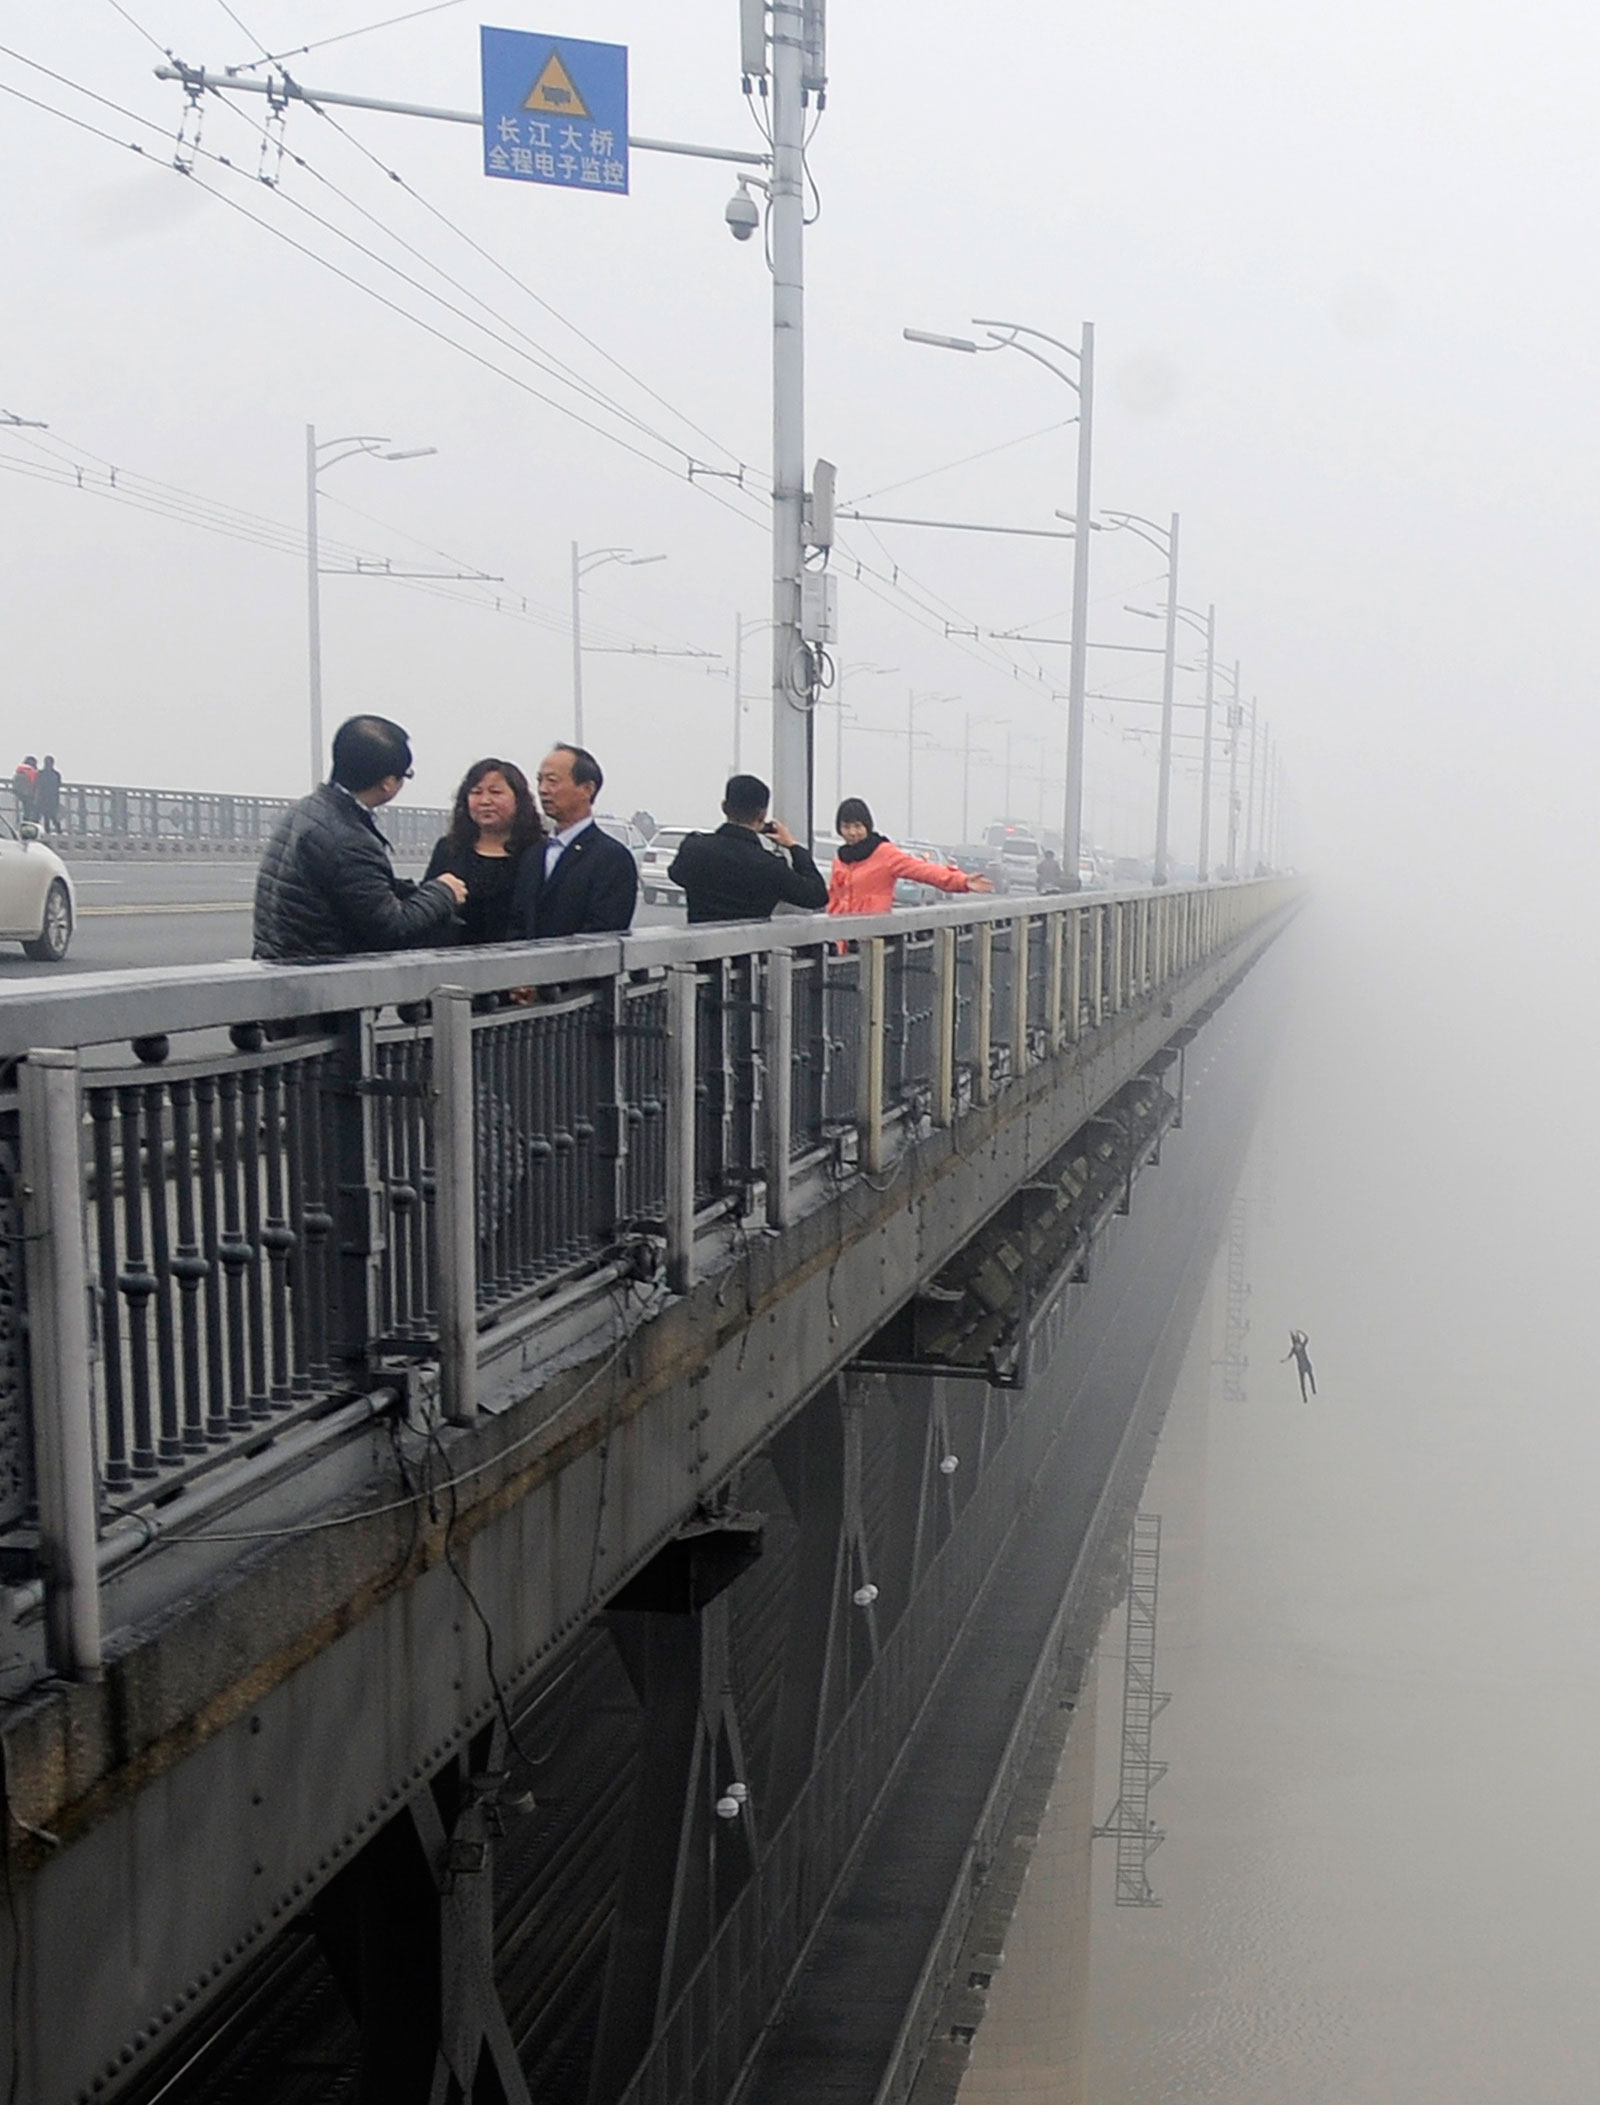 A photographer in China in 2013 accidentally captured the moment of a person jumping from a bridge to his death.